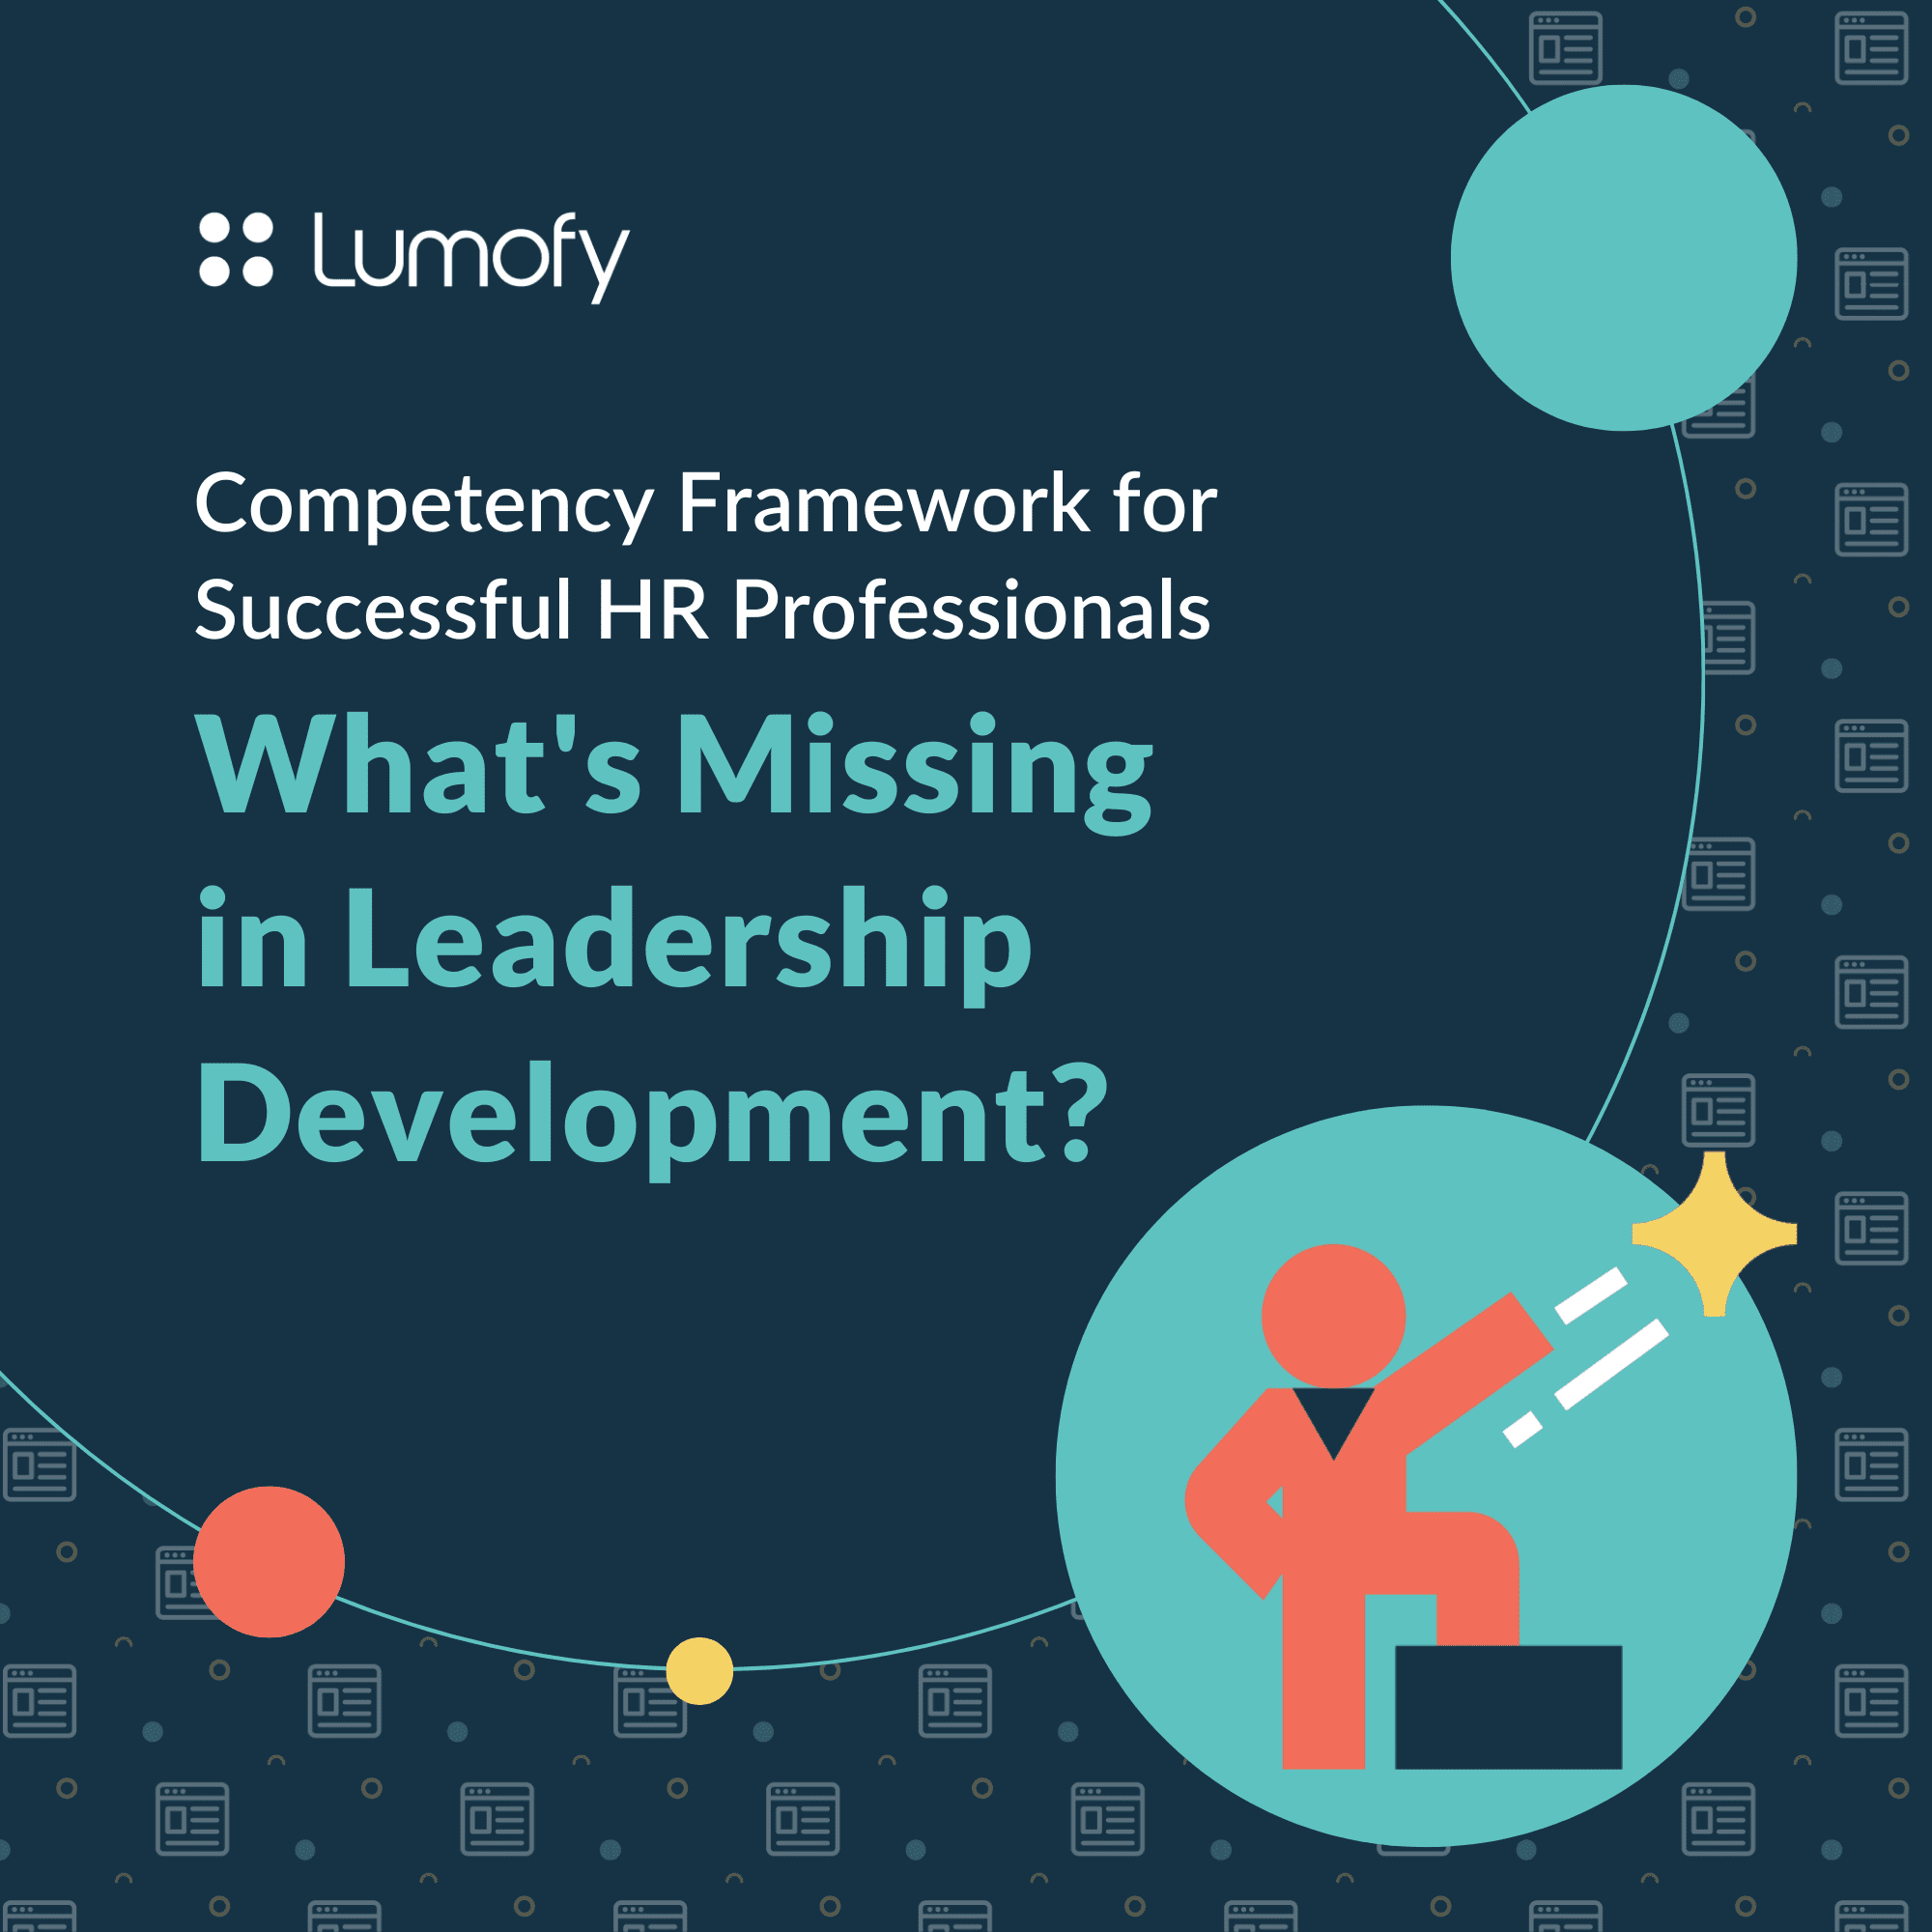 What’s Missing In Leadership Development? Competency Framework For Successful HR Professionals